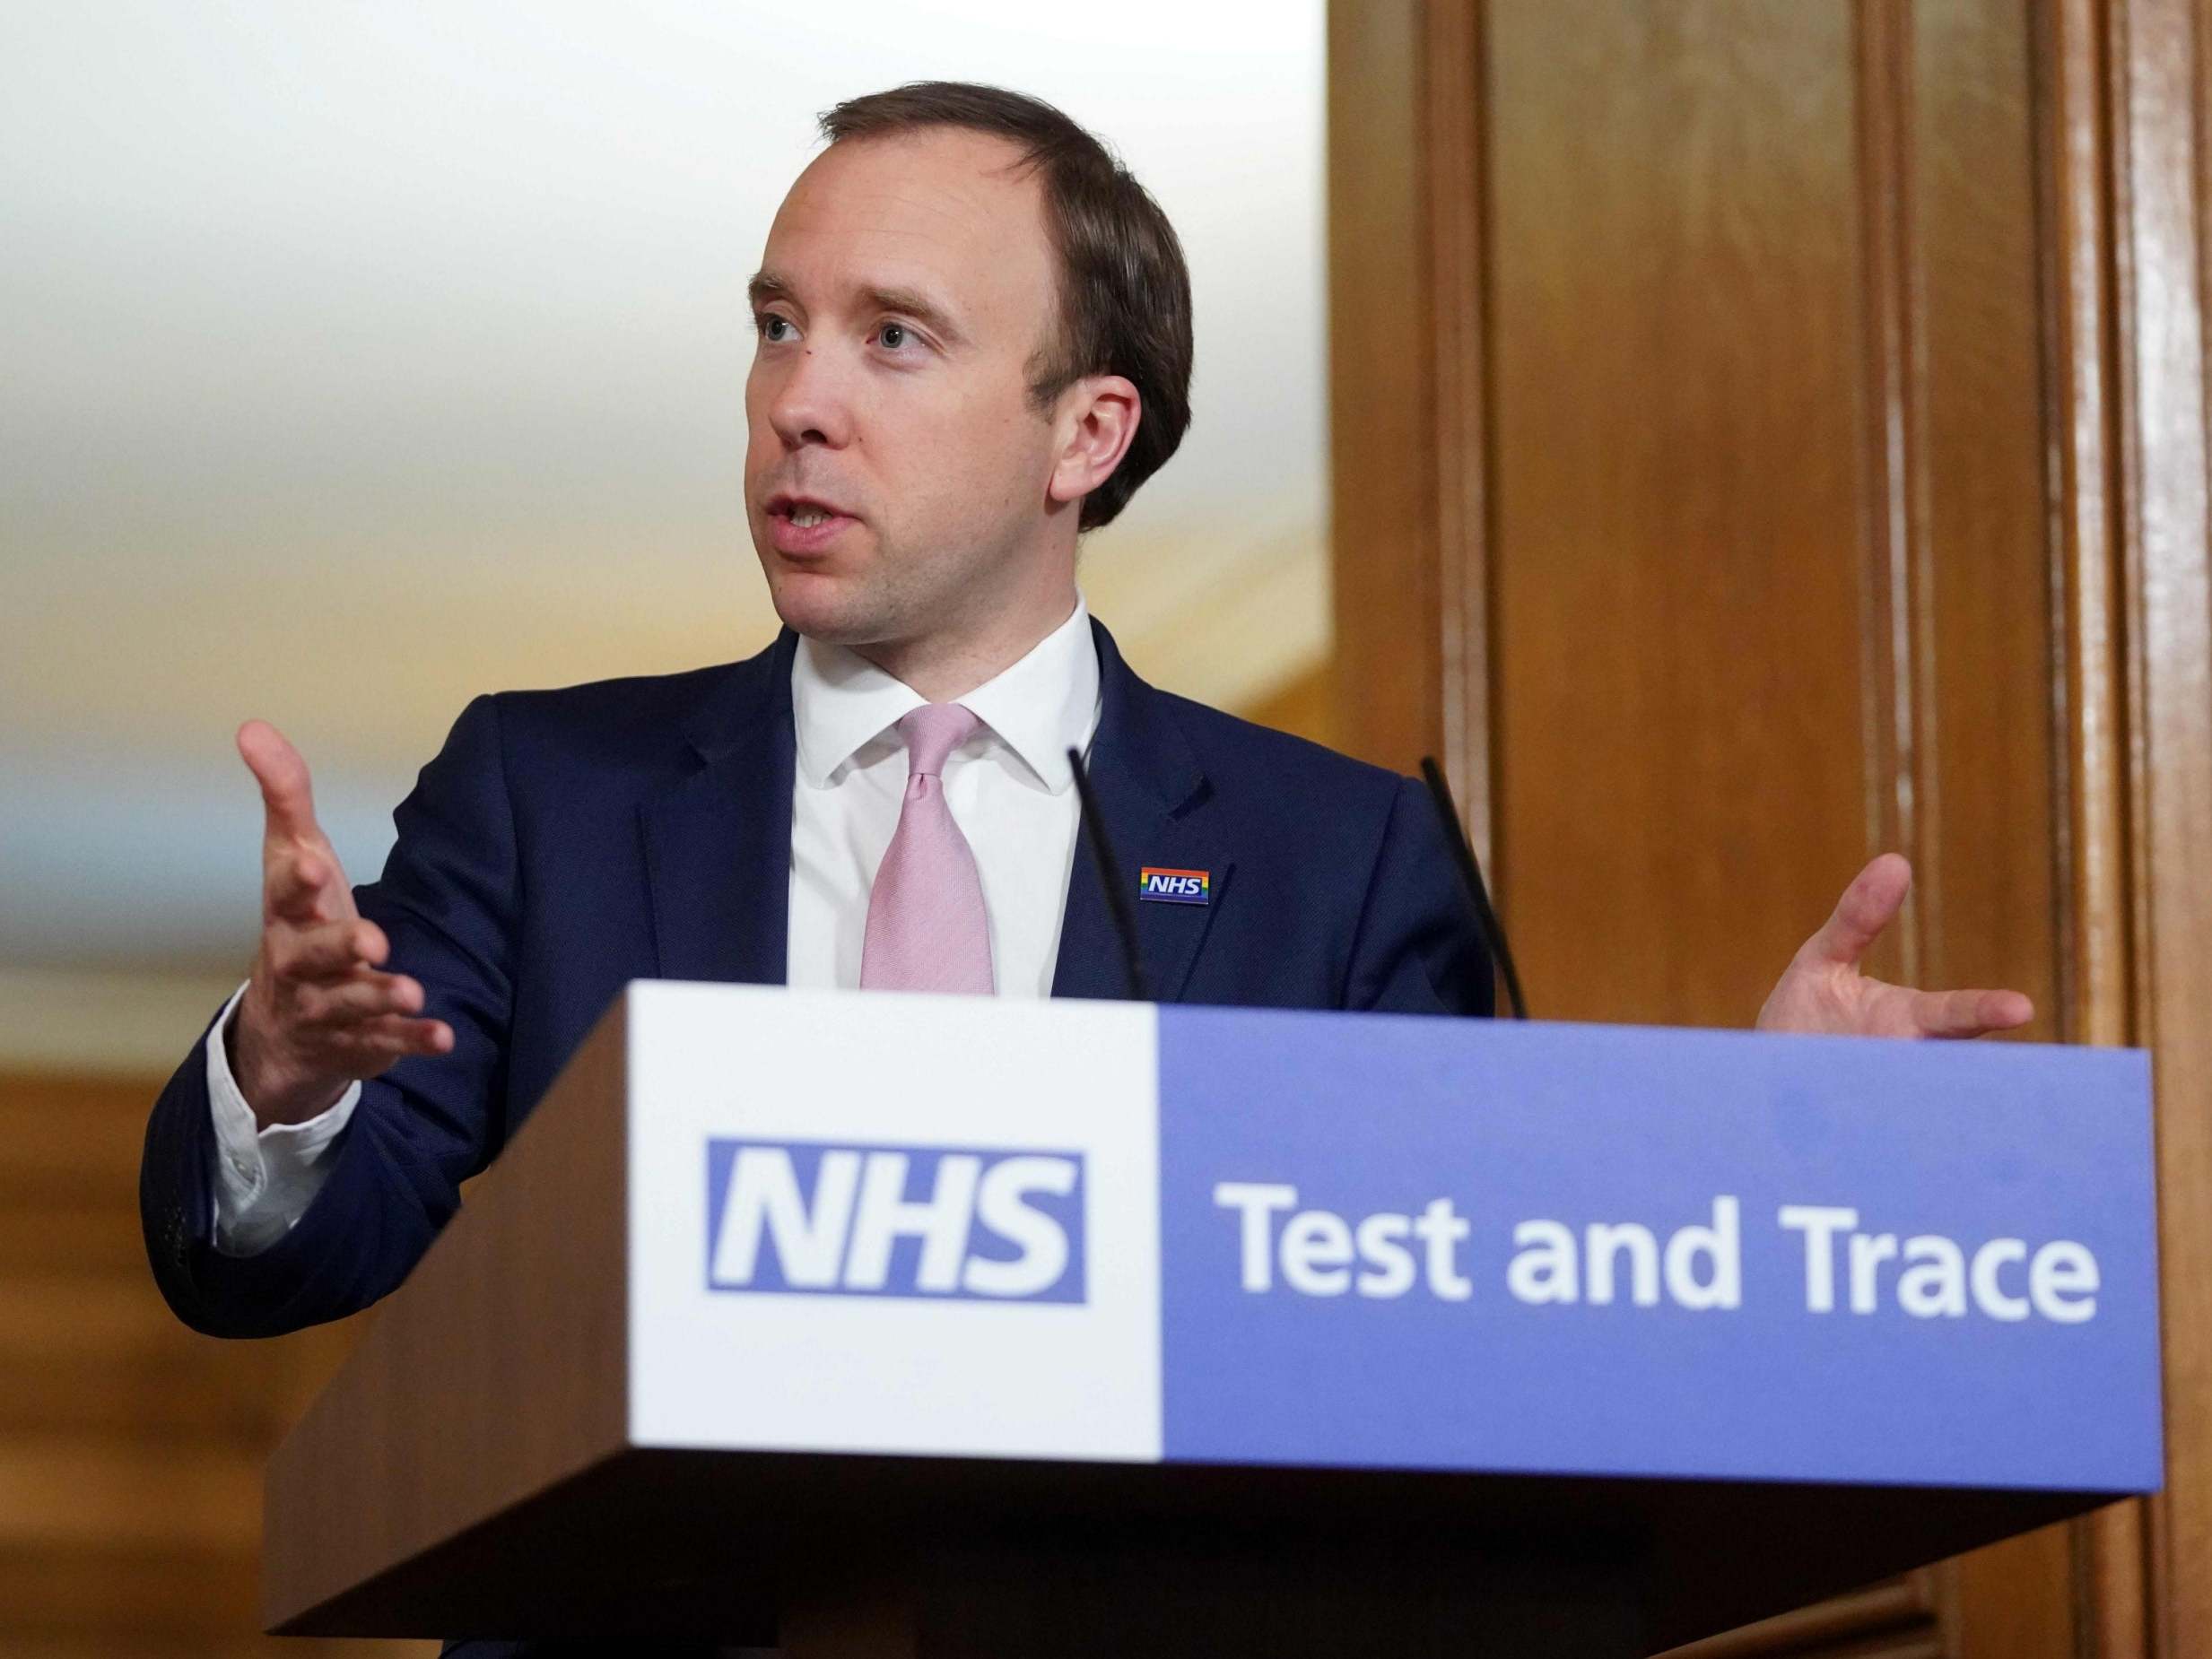 Matt Hancock speaking about NHS Test and Trace at Downing Street